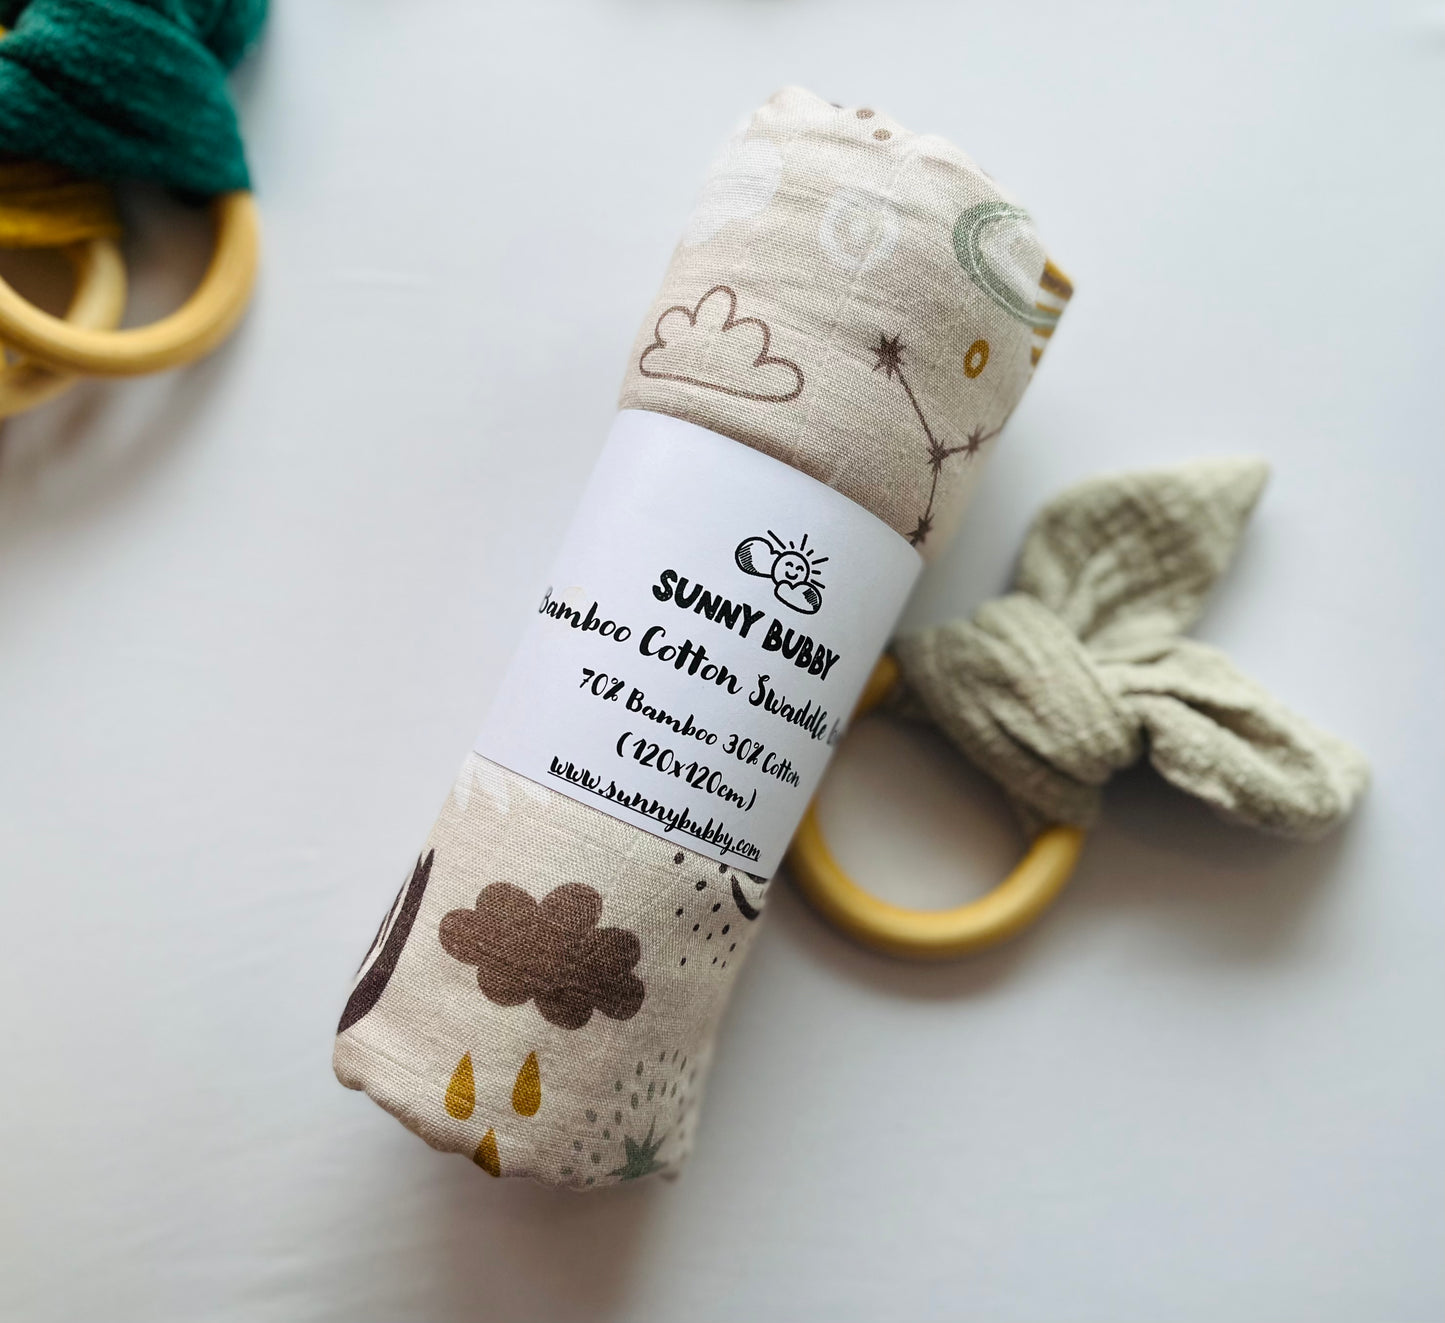 Solar System Bamboo Cotton Swaddle